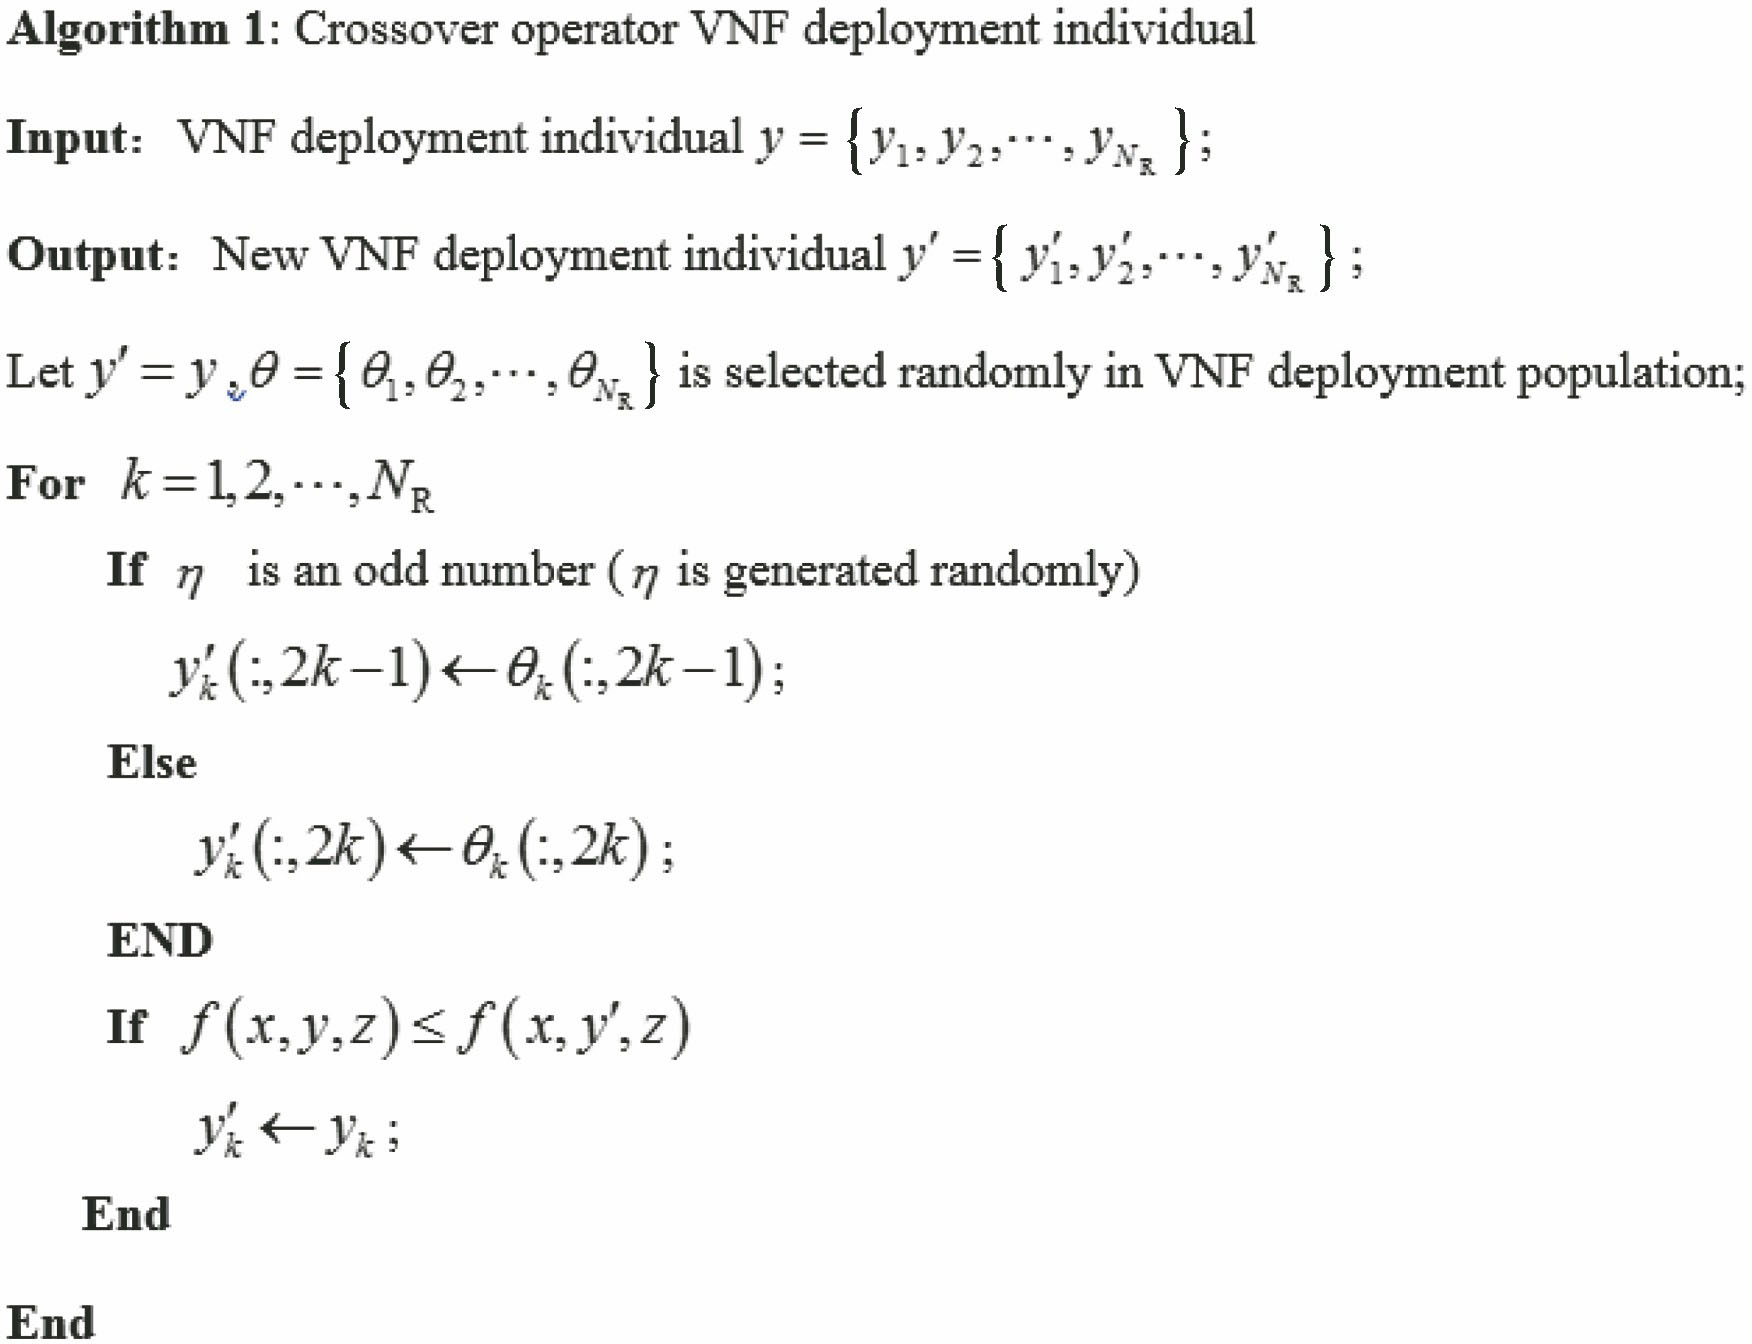 Crossover operator for VNF deployment individual